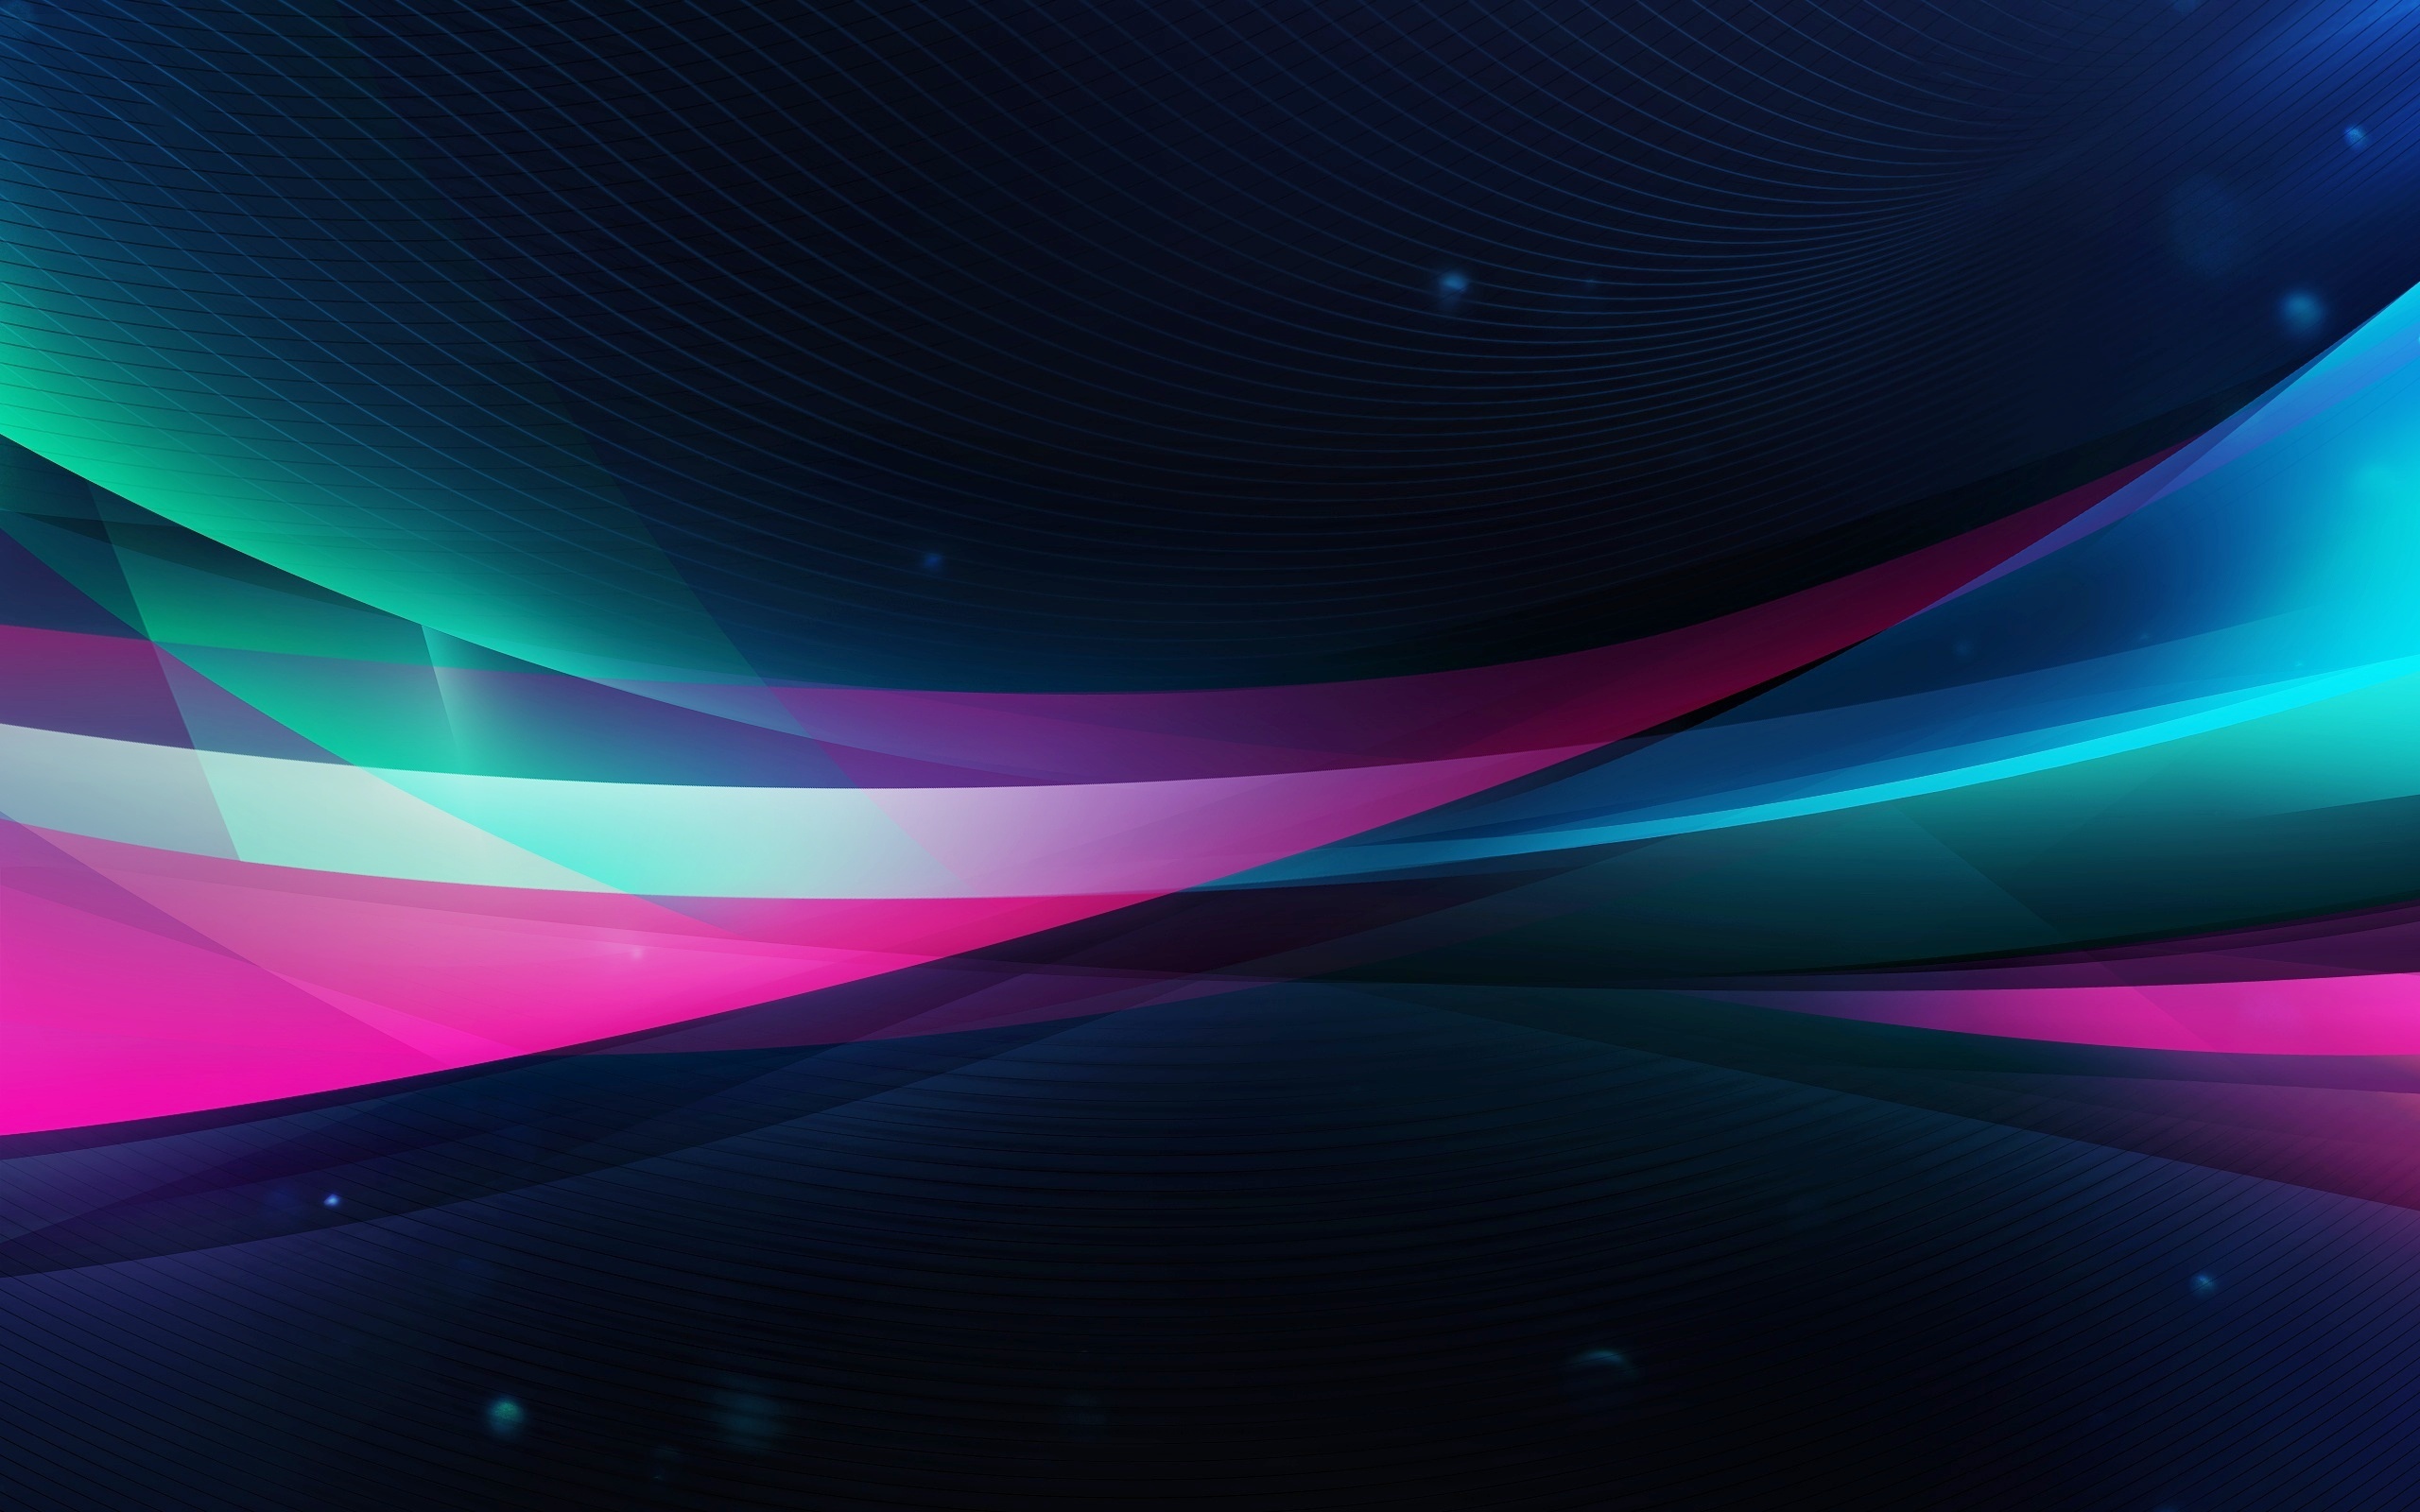 Colored Abstract Lines Wallpaper 1572 2560x1600 - uMad.com